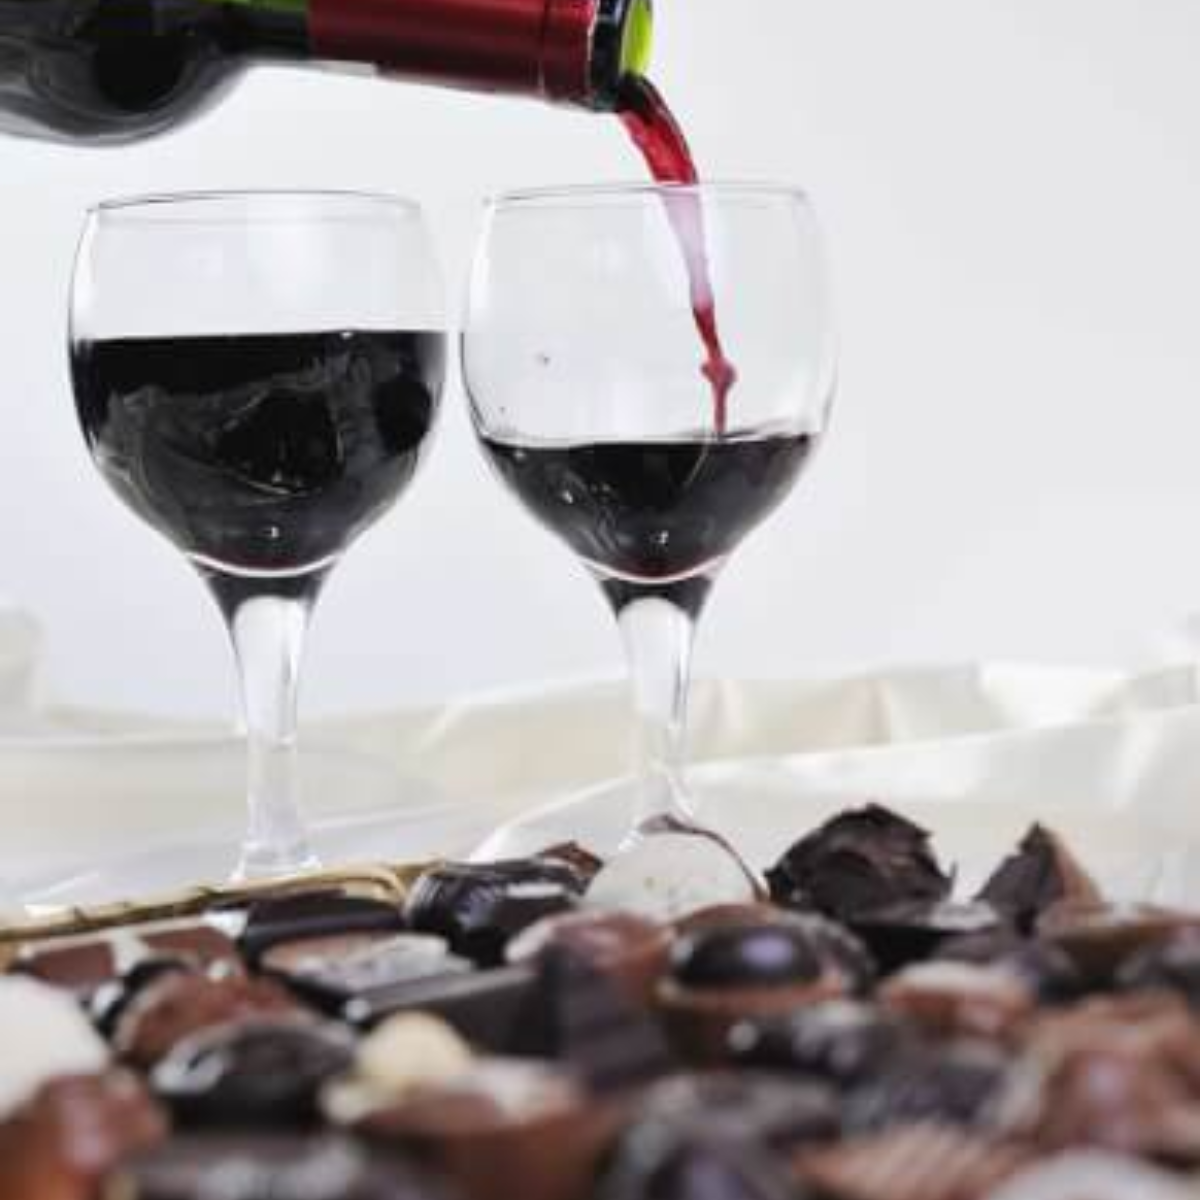 40. Indulge in a Delightful Wine and Chocolate Tasting Experience for Your Anniversary